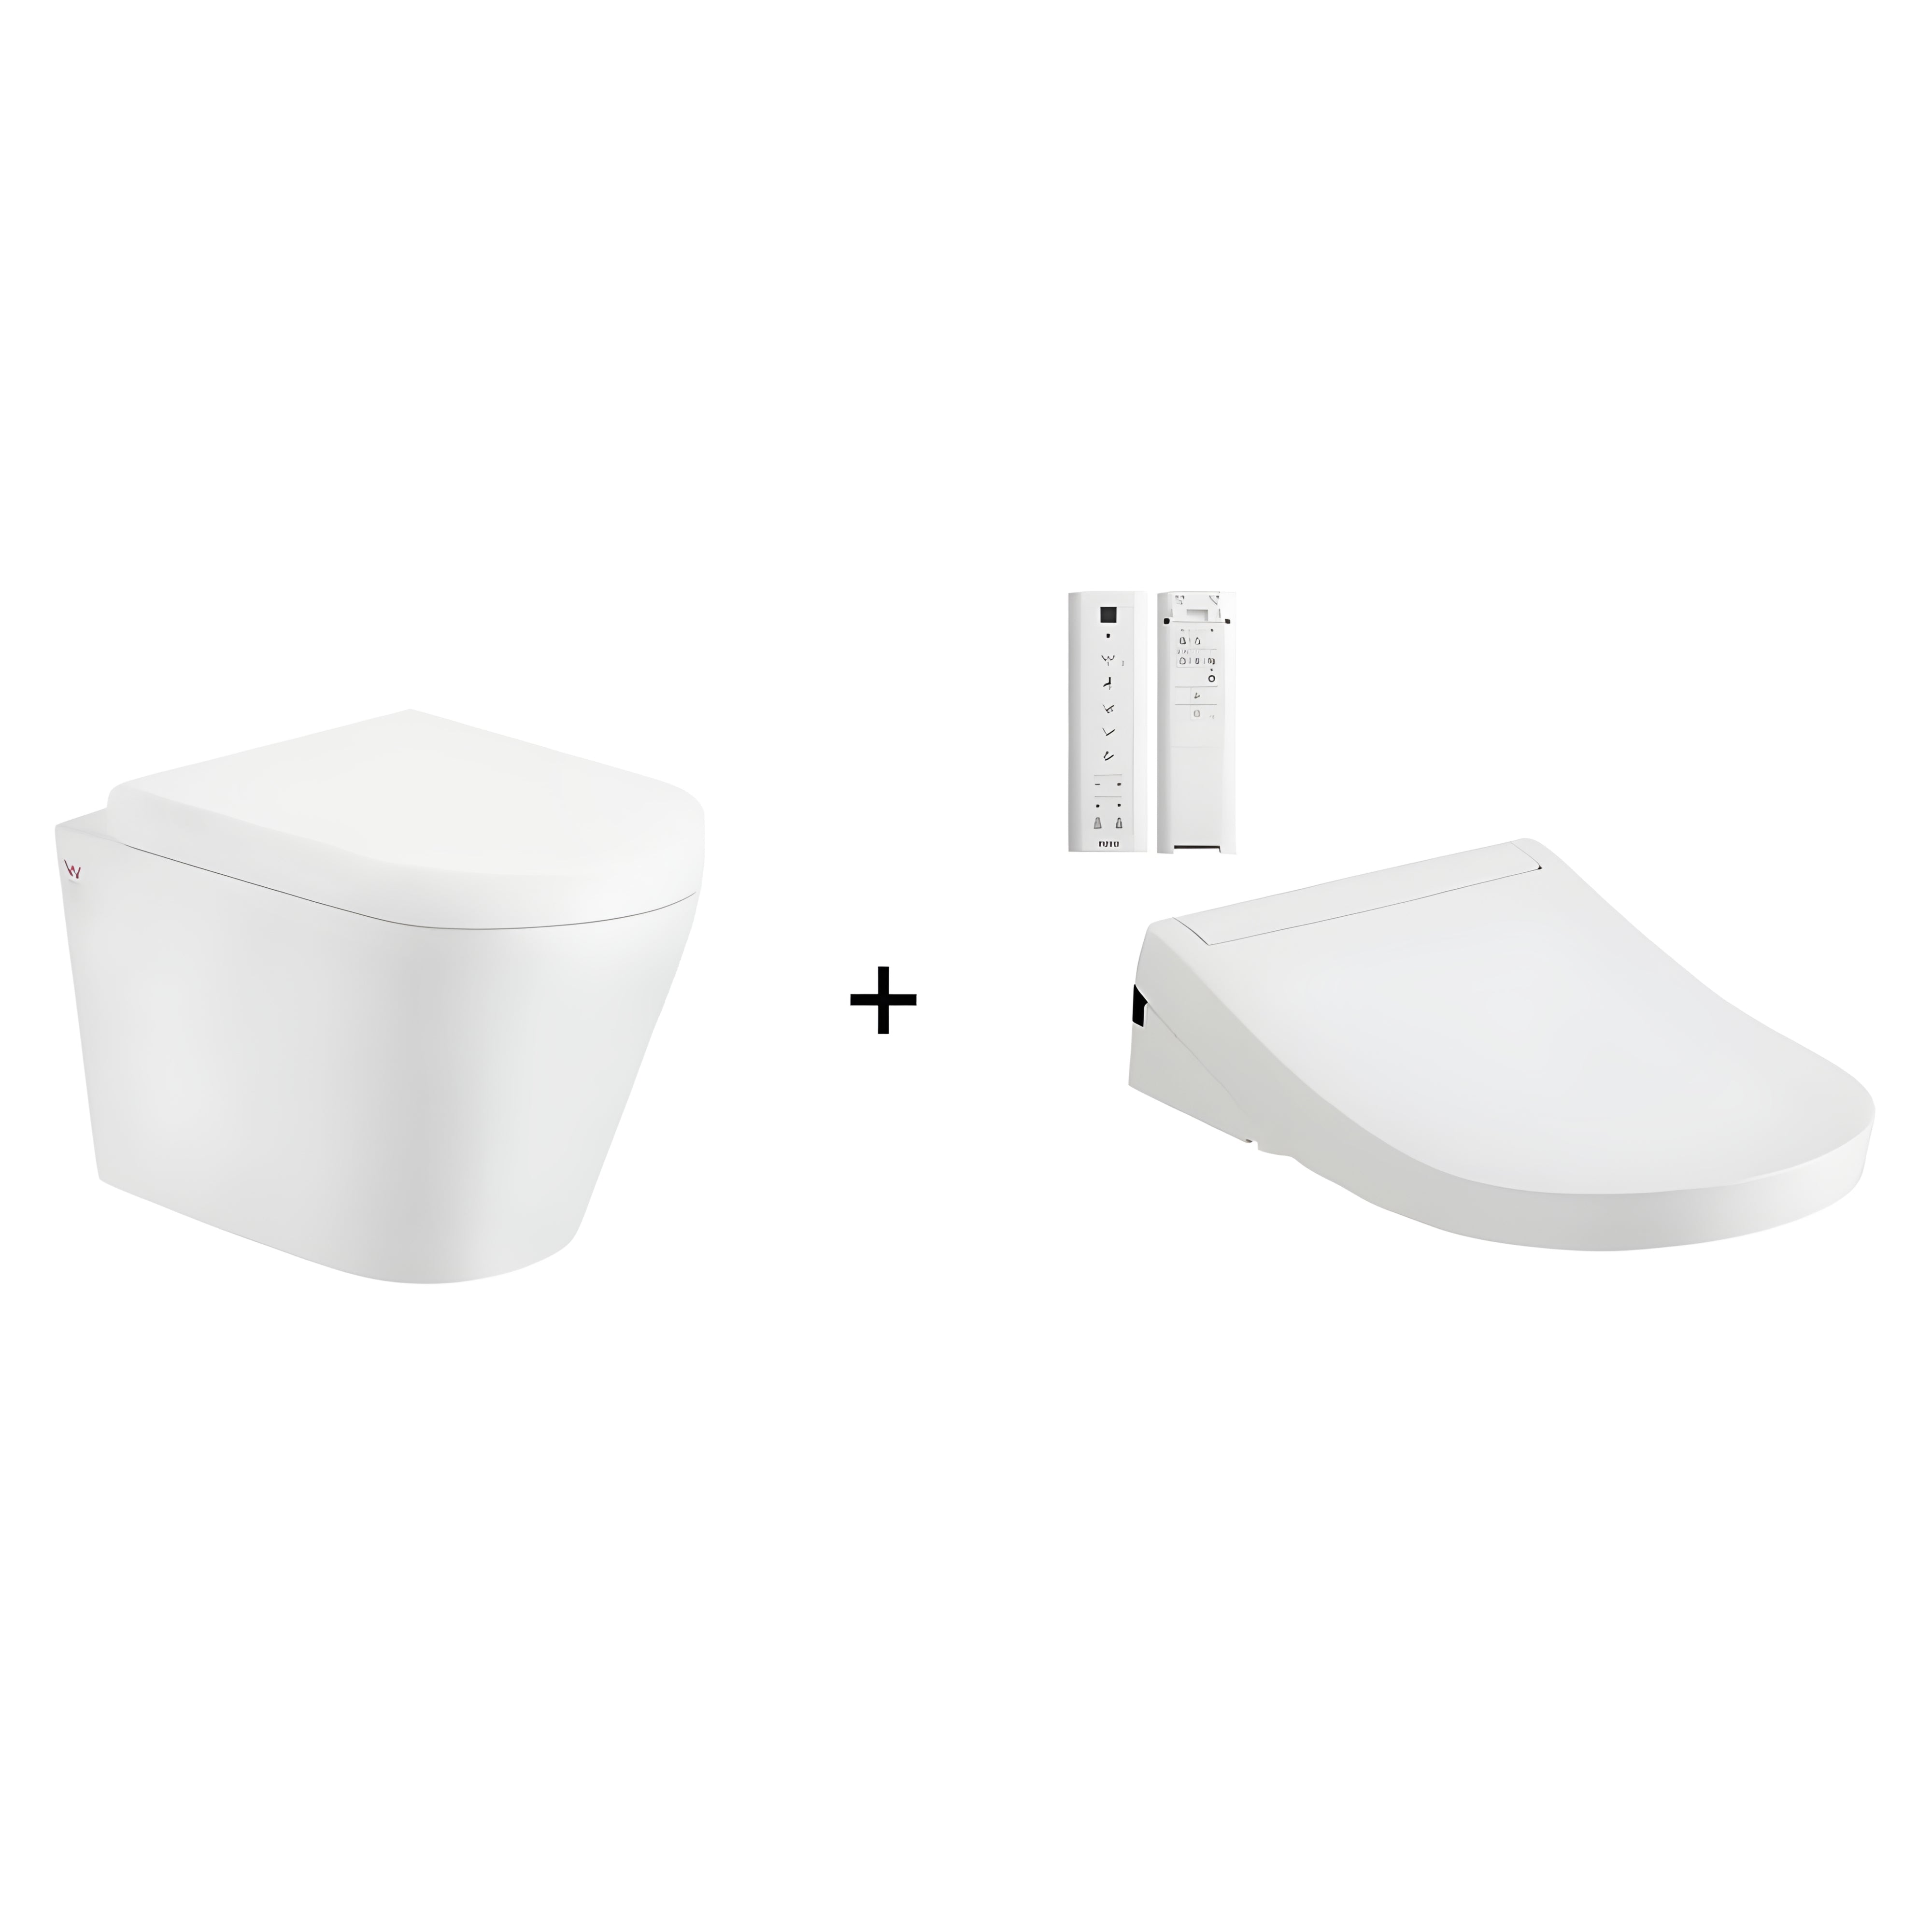 TOTO S5 WASHLET W/ REMOTE CONTROL AND WALL HUNG RIMLESS TOILET PACKAGE (D-SHAPED) GLOSS WHITE